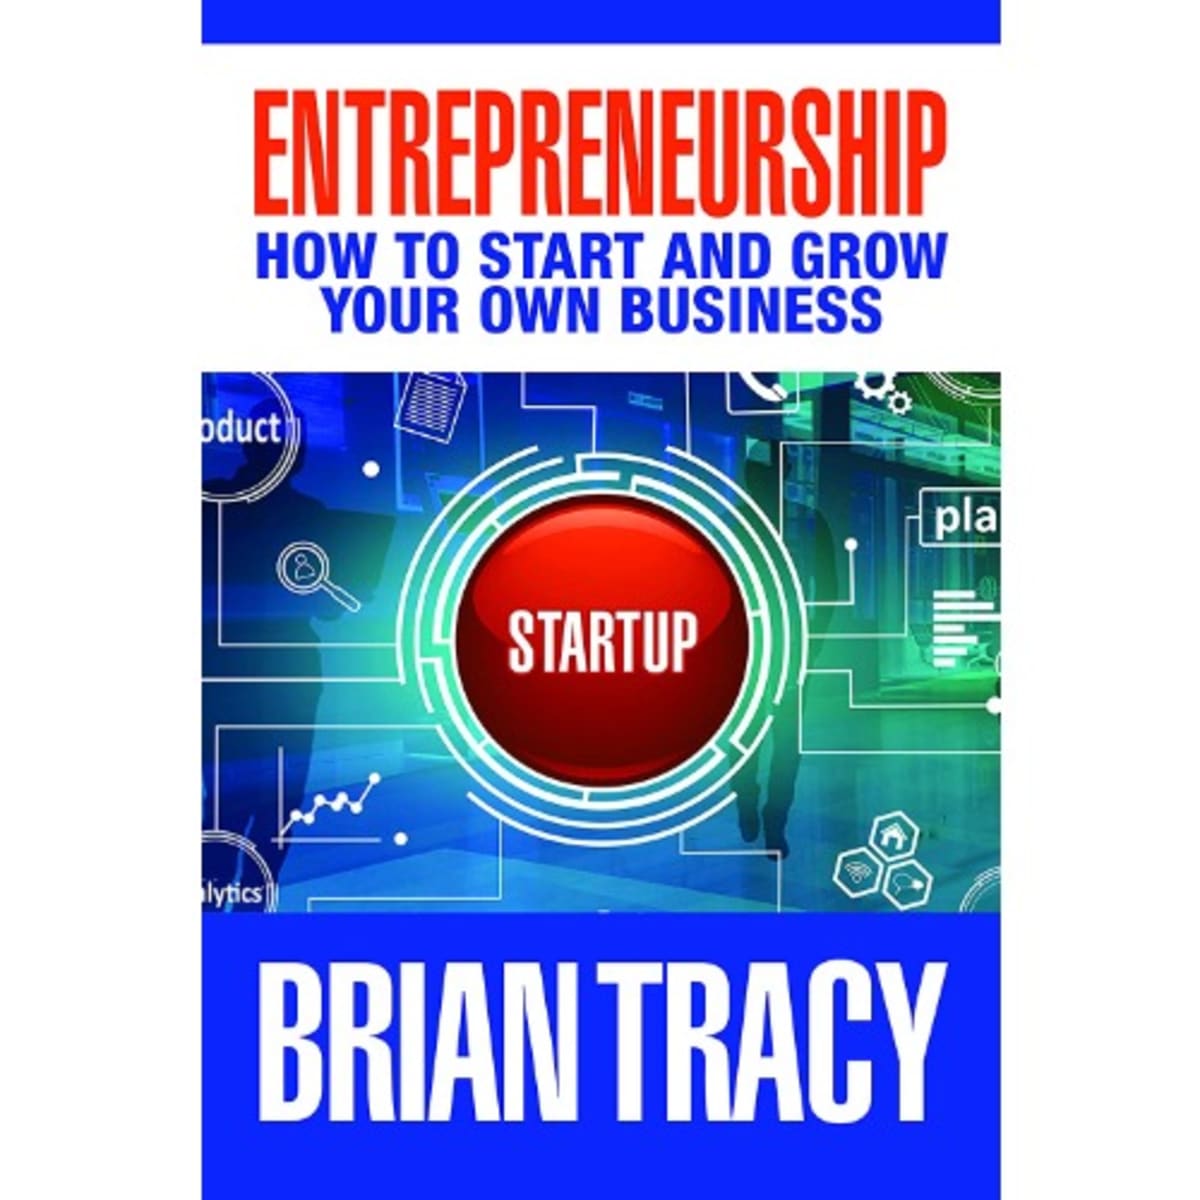 Grow　Own　Online　To　Tracy　Entrepreneurship:　Shopping　And　Konga　Your　How　By　Brian　Start　Business